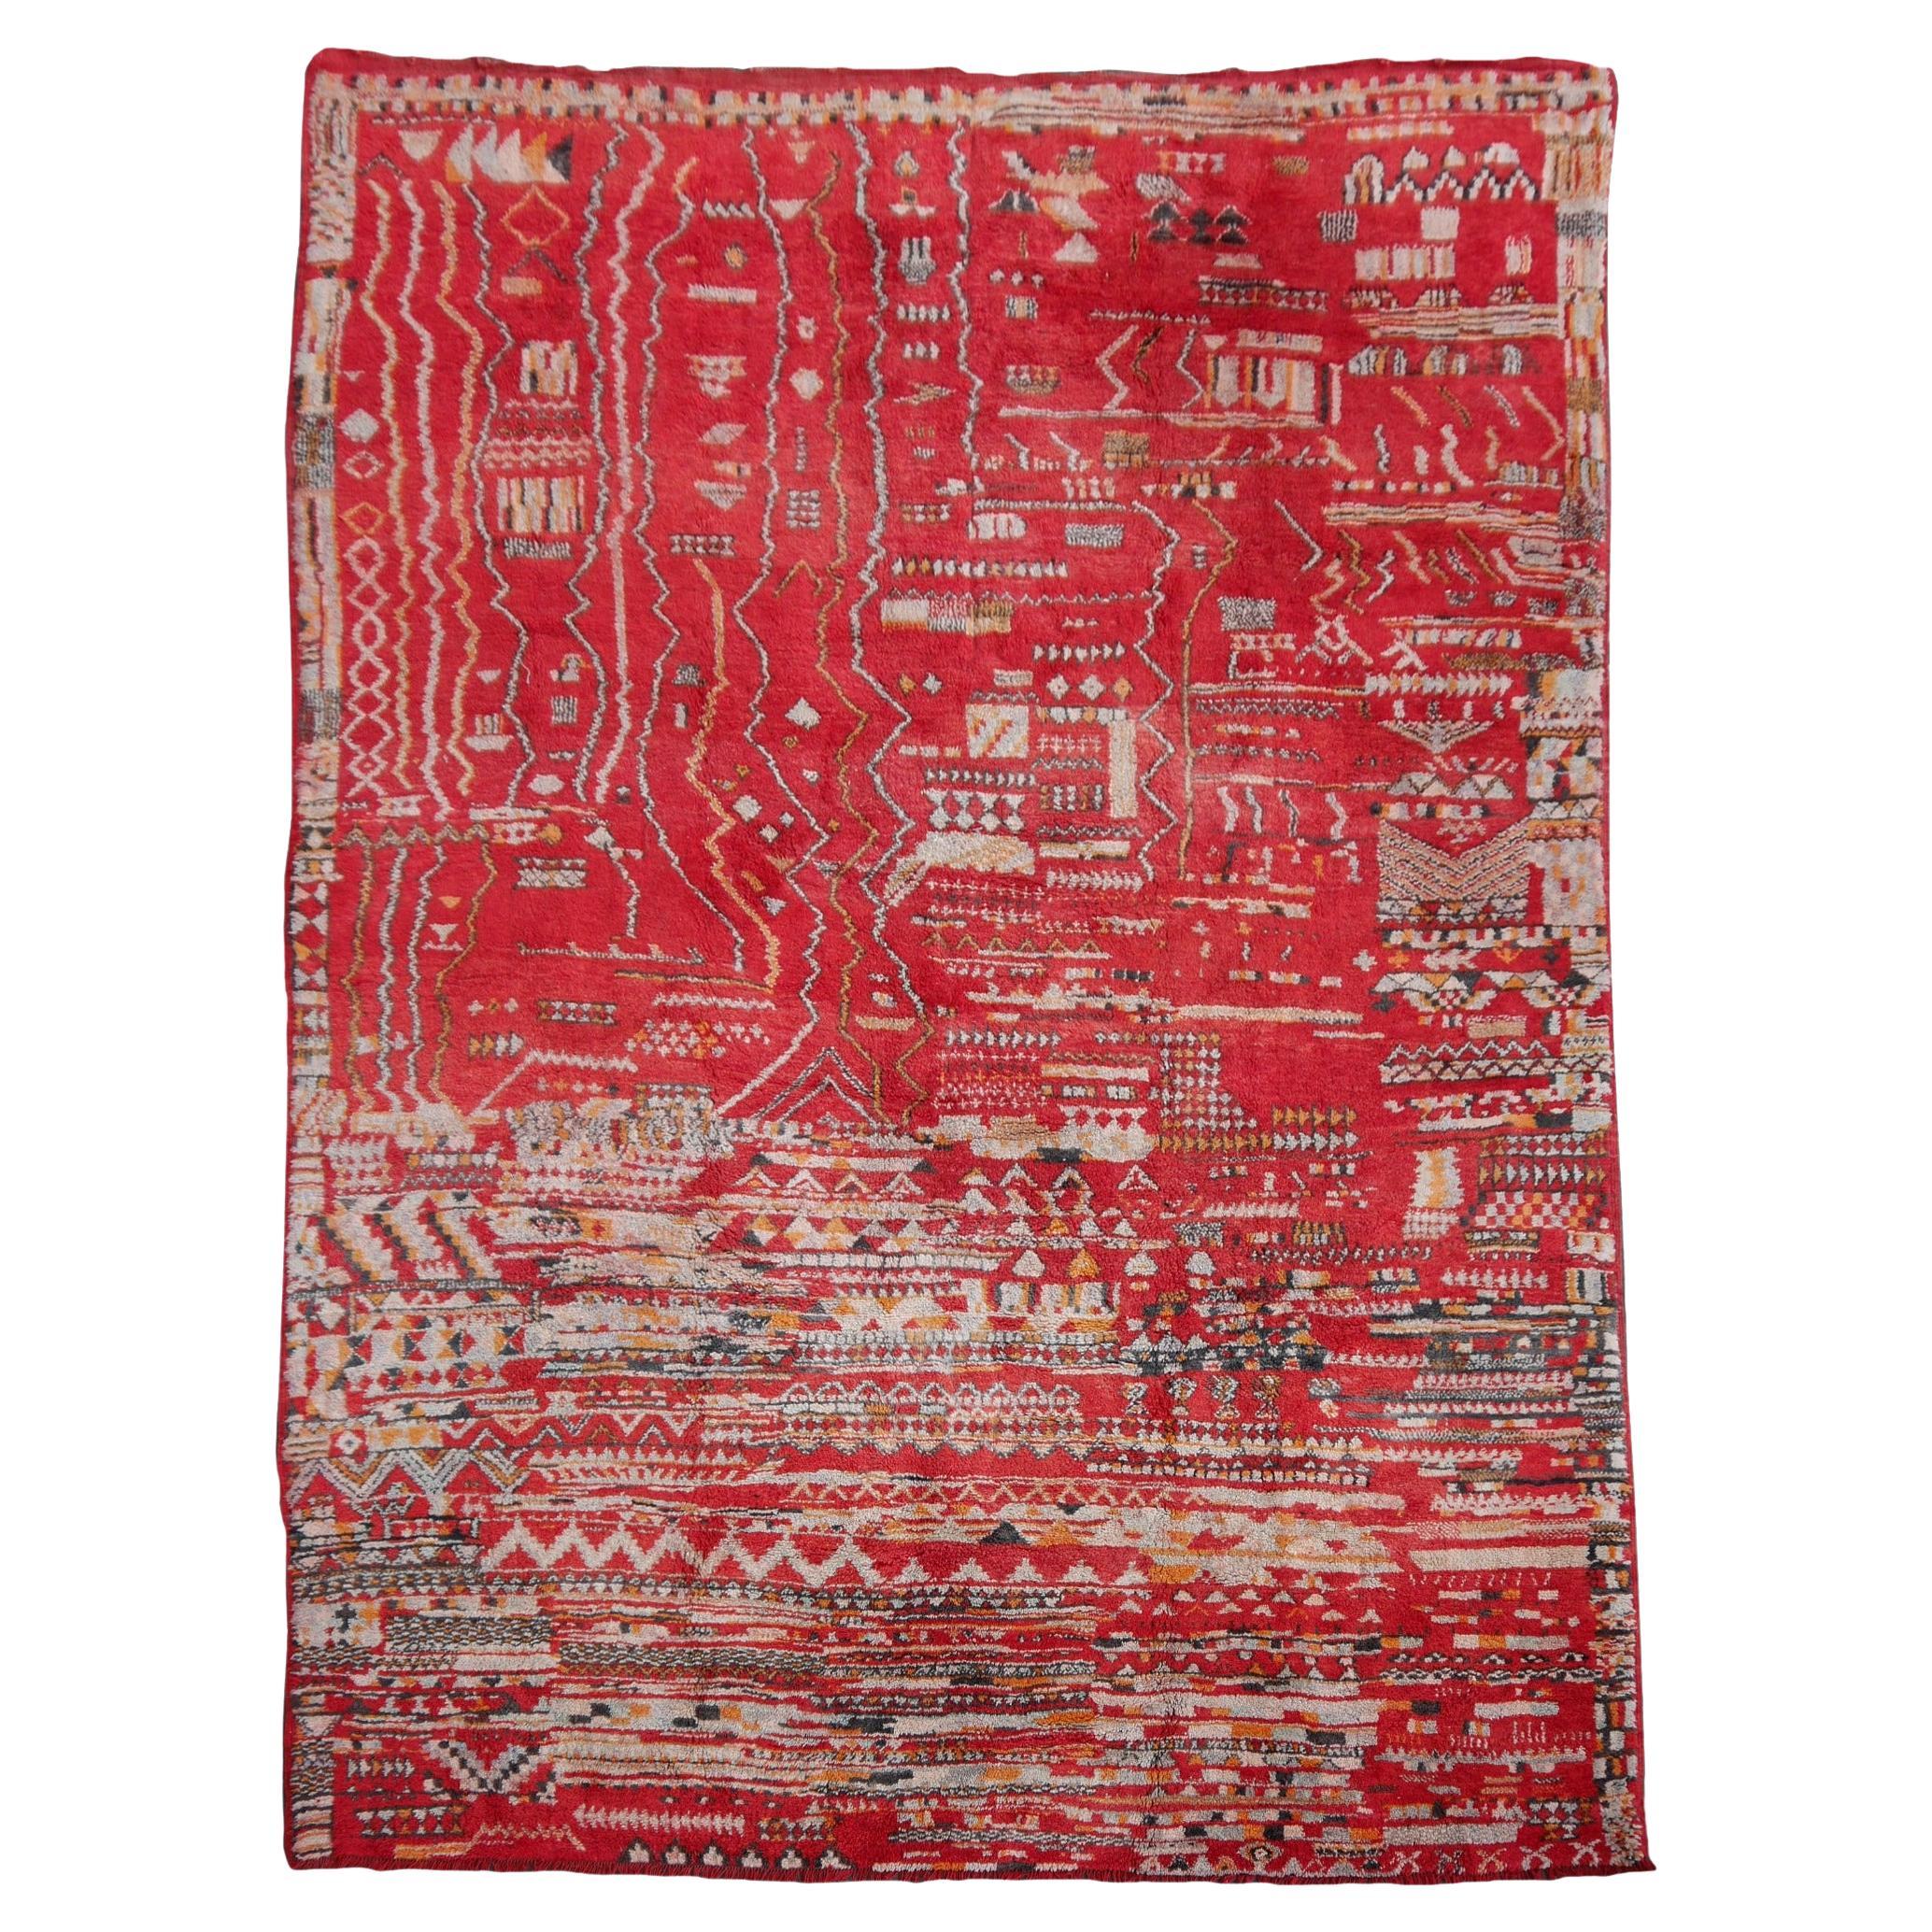 Grand tapis marocain rouge au design tribal nord-africain Collection Djoharian